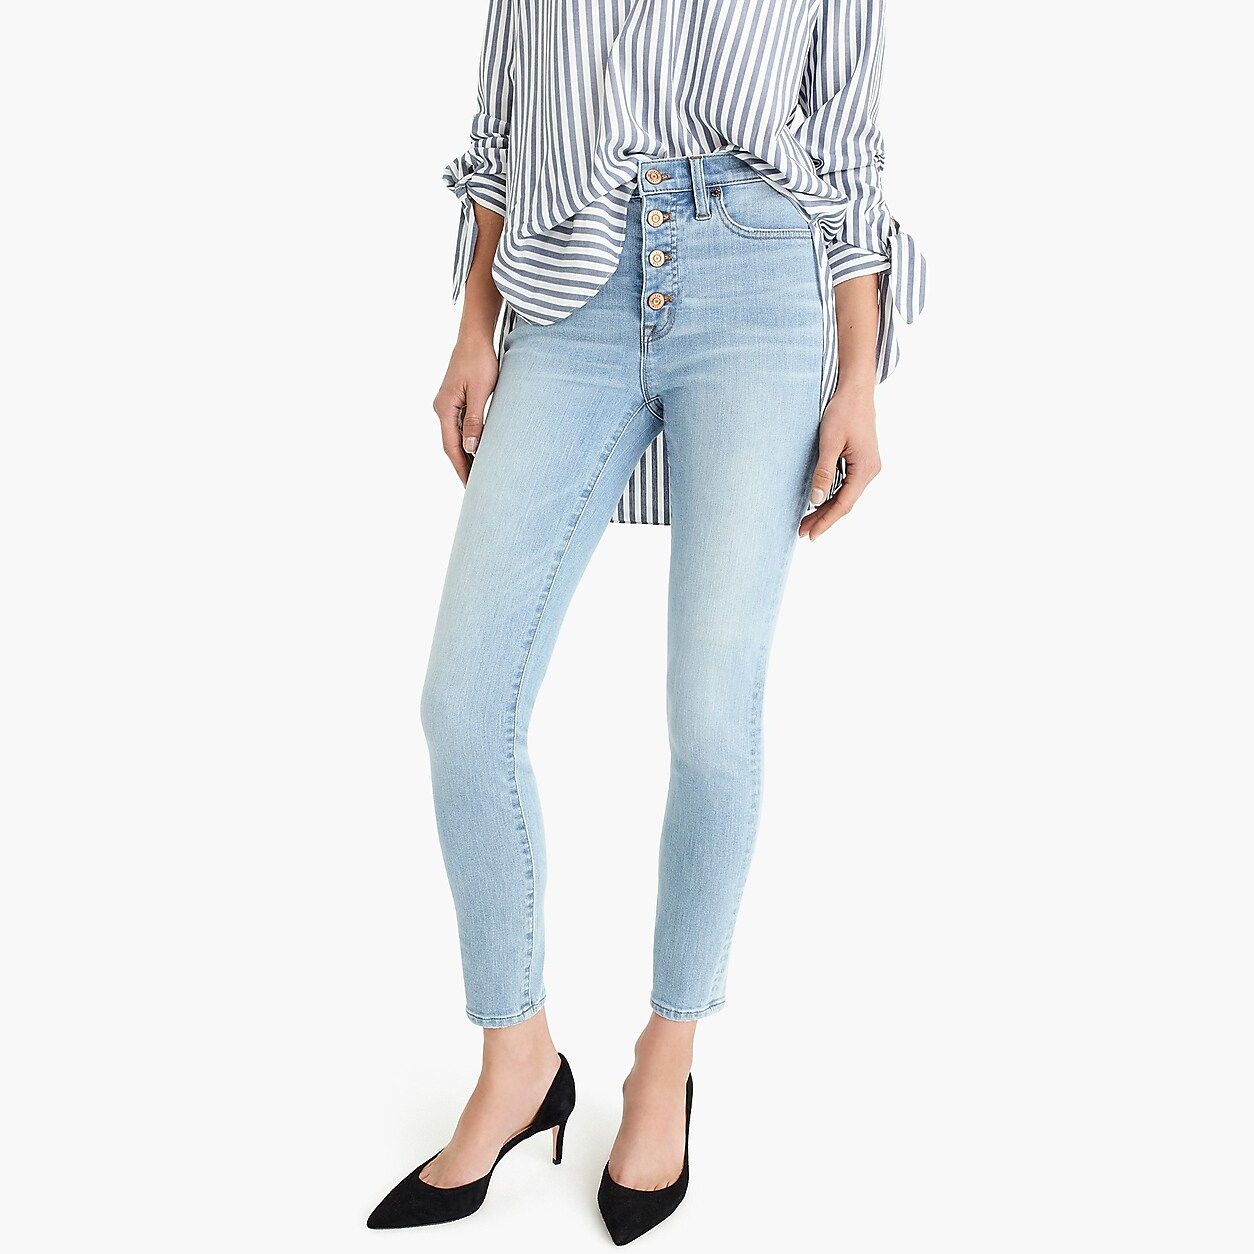 9" high-rise toothpick jean in Leddy wash with button fly | J.Crew US